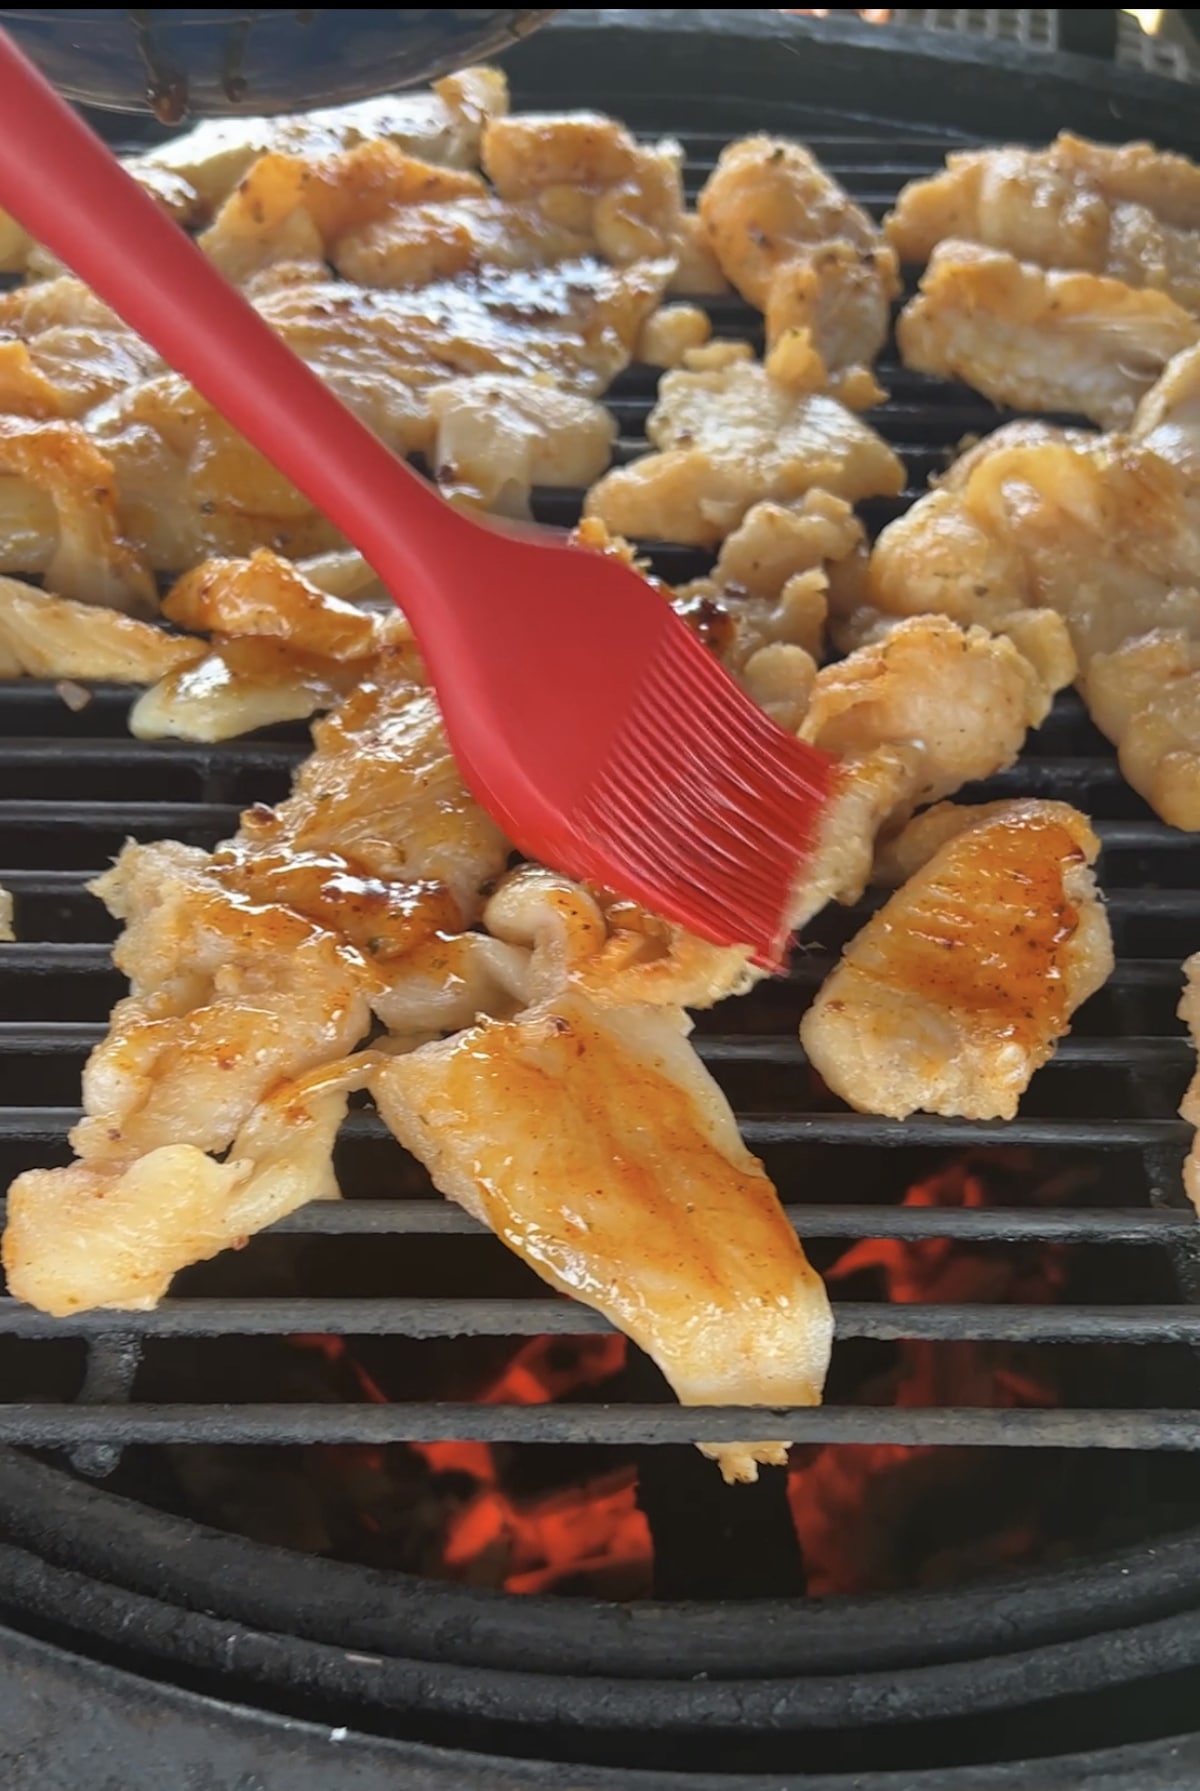 Grilling catfish fillets with honey garlic sauce.